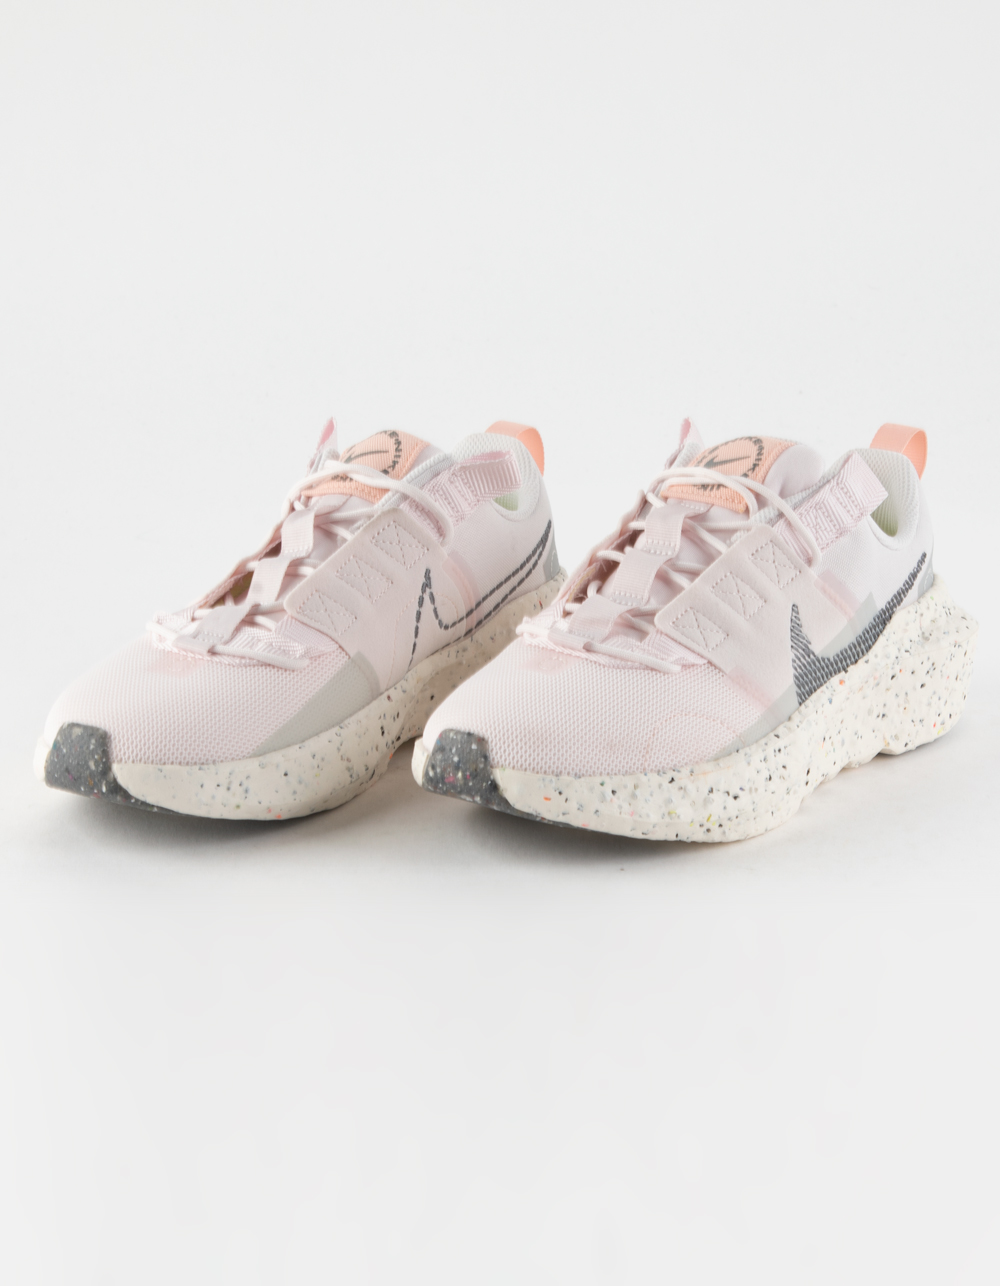 NIKE Crater Impact Womens Shoes - PINK | Tillys